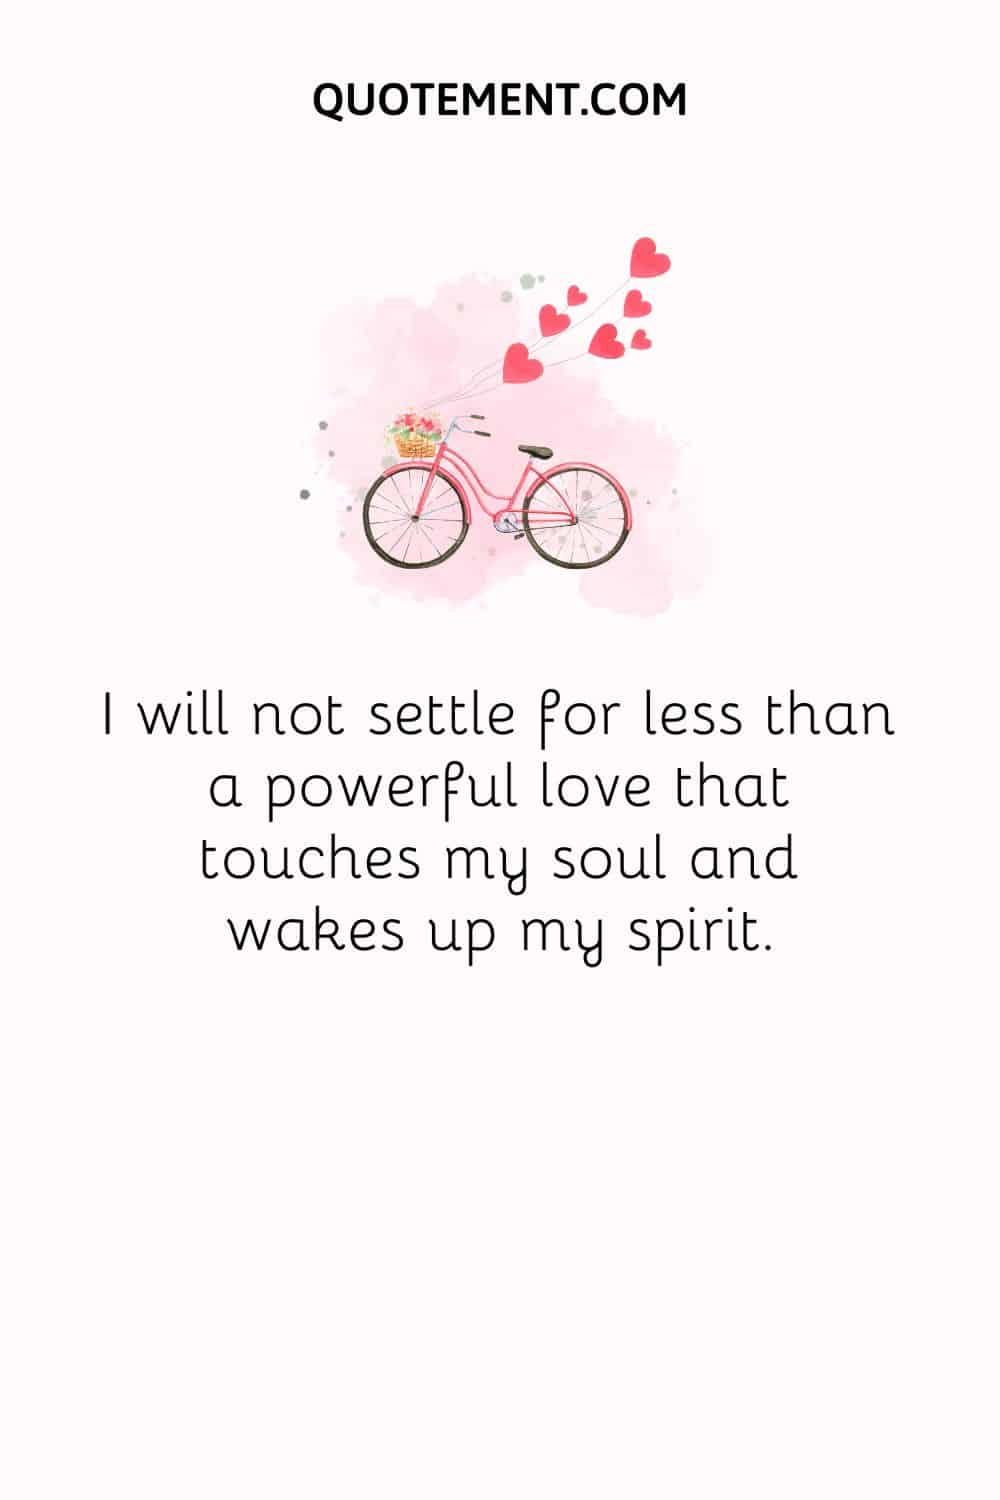 I will not settle for less than a powerful love that touches my soul and wakes up my spirit